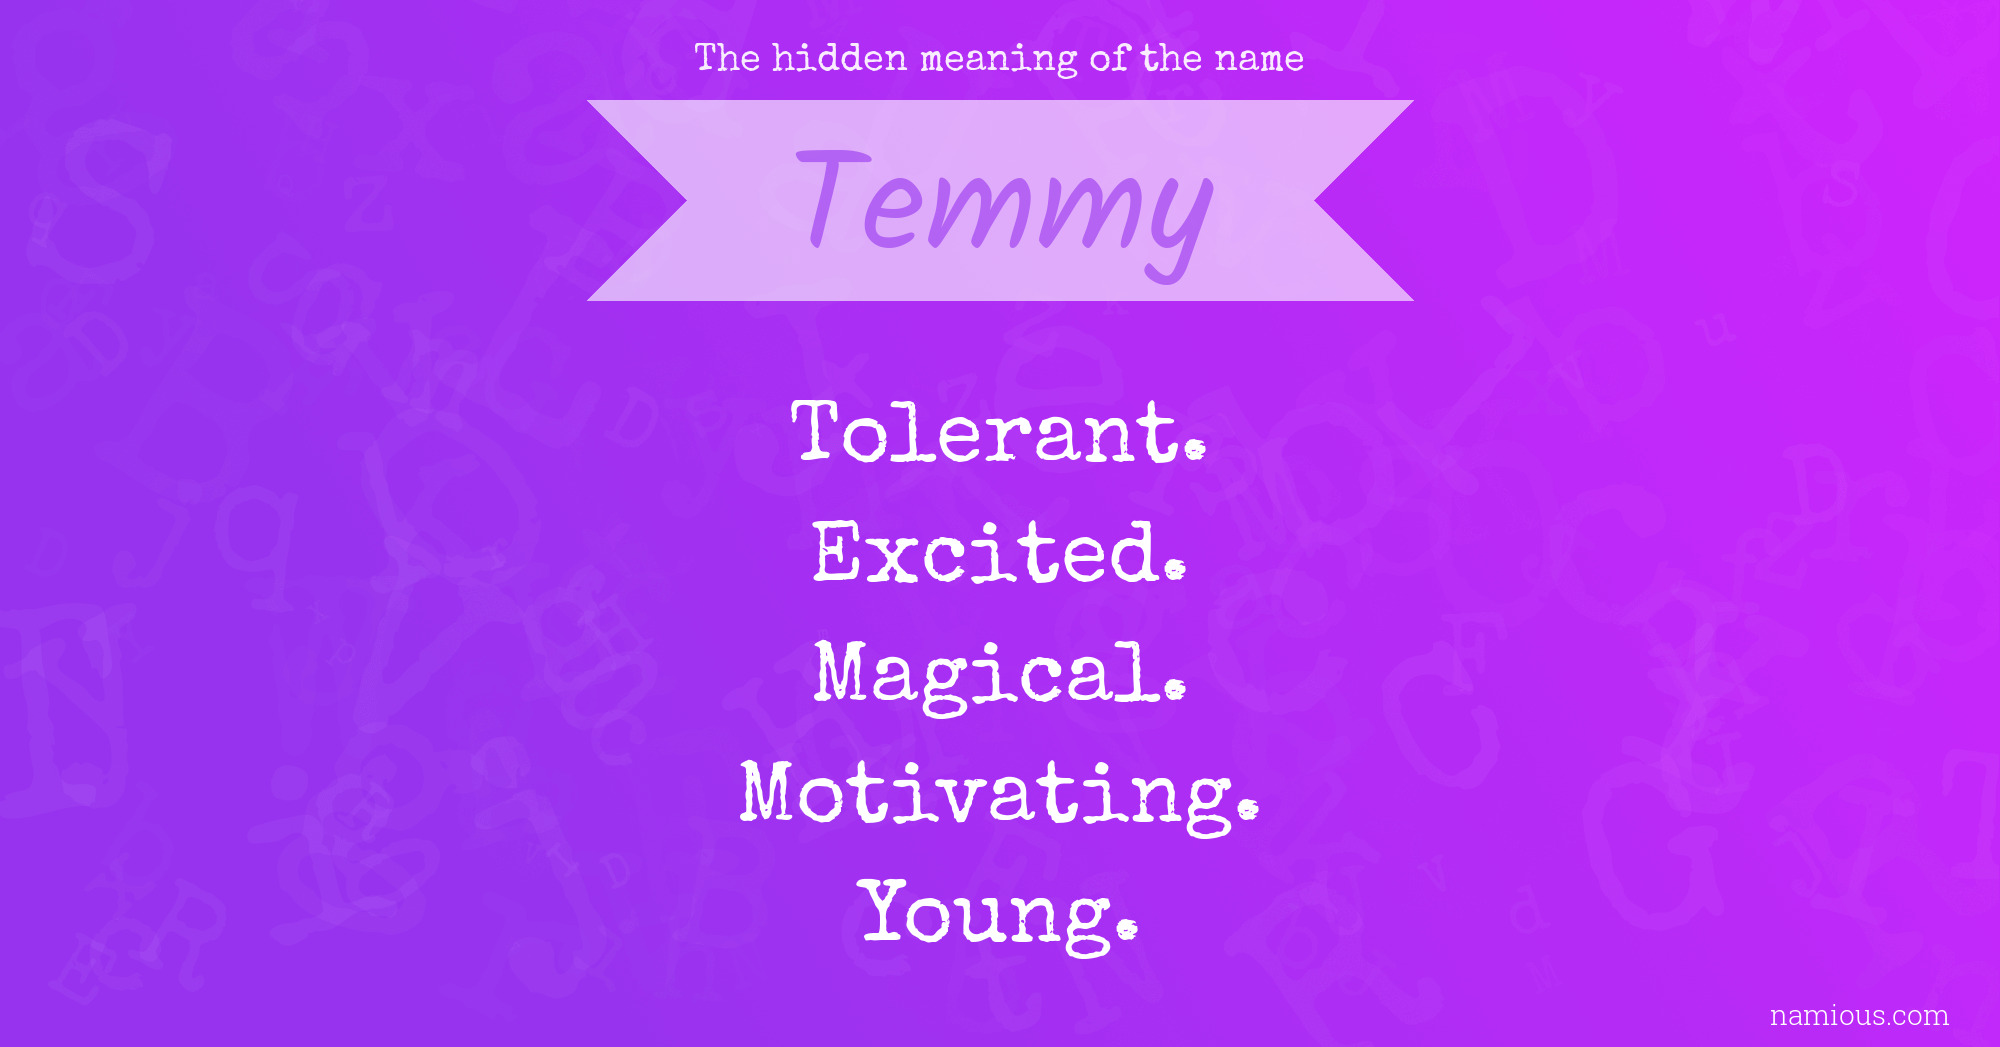 The hidden meaning of the name Temmy